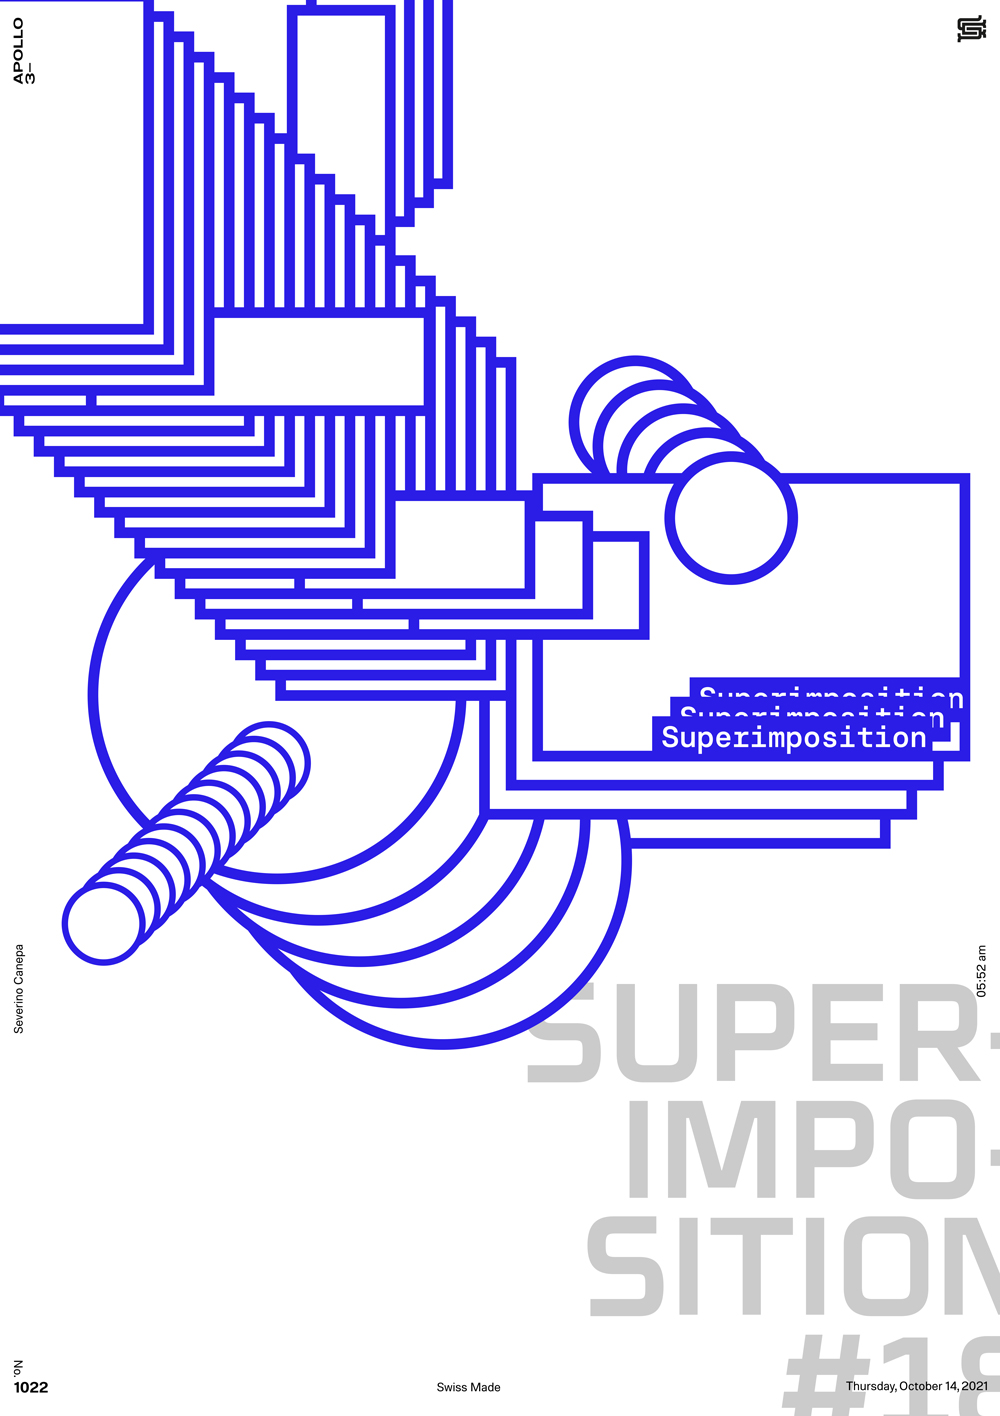 Superimposition 18 design is a new abstract experimentation realized with basic shapes